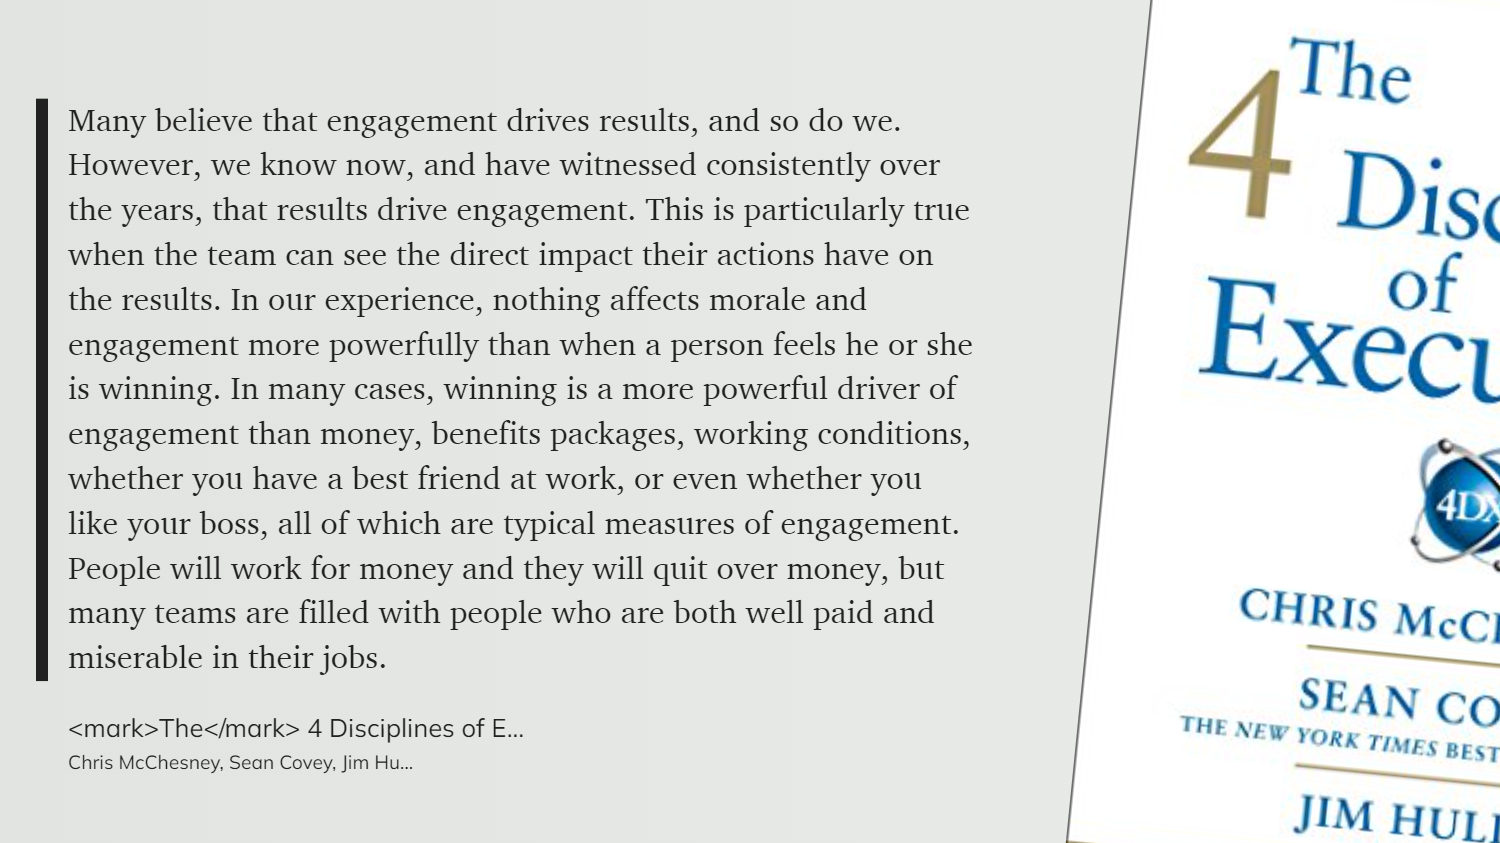 People who feel they are winning drive results Quote - 4 Disciplines of Execution-1